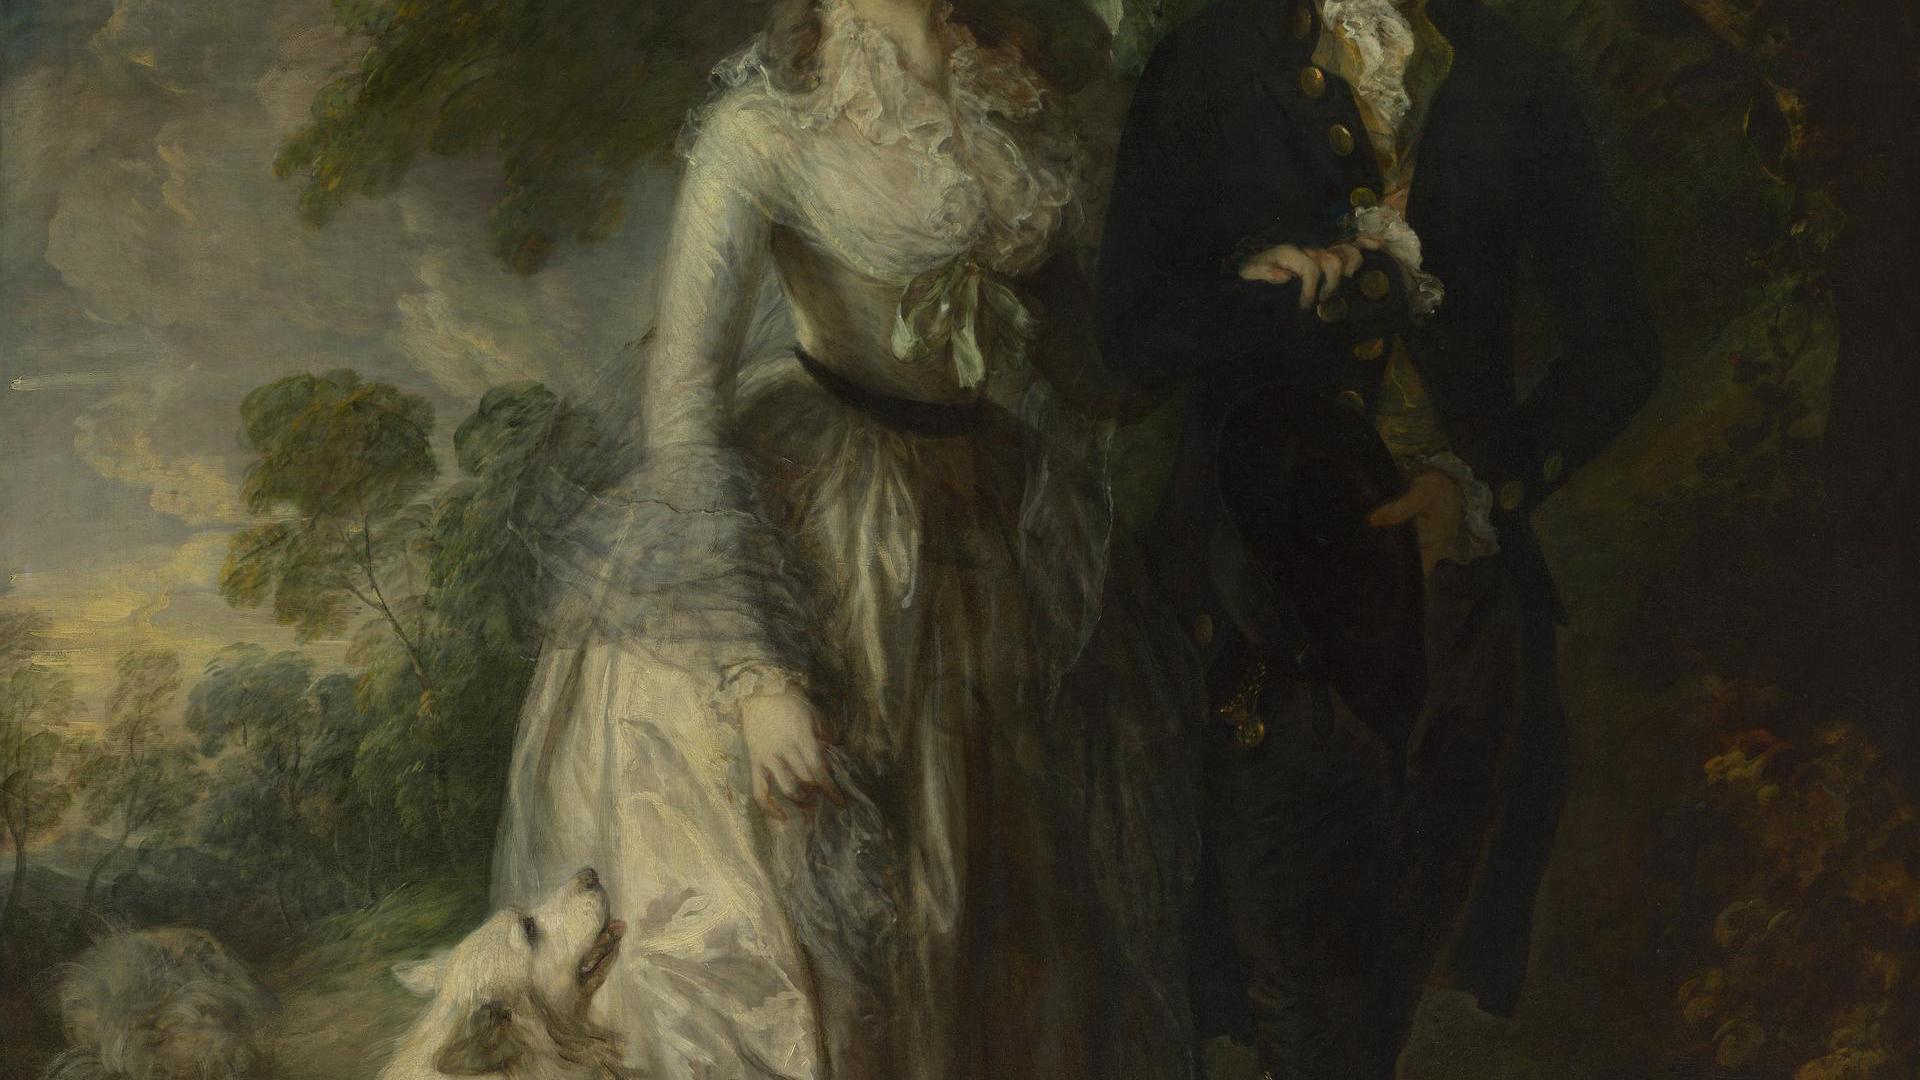 Mr and Mrs William Hallett ('The Morning Walk') by Thomas Gainsborough